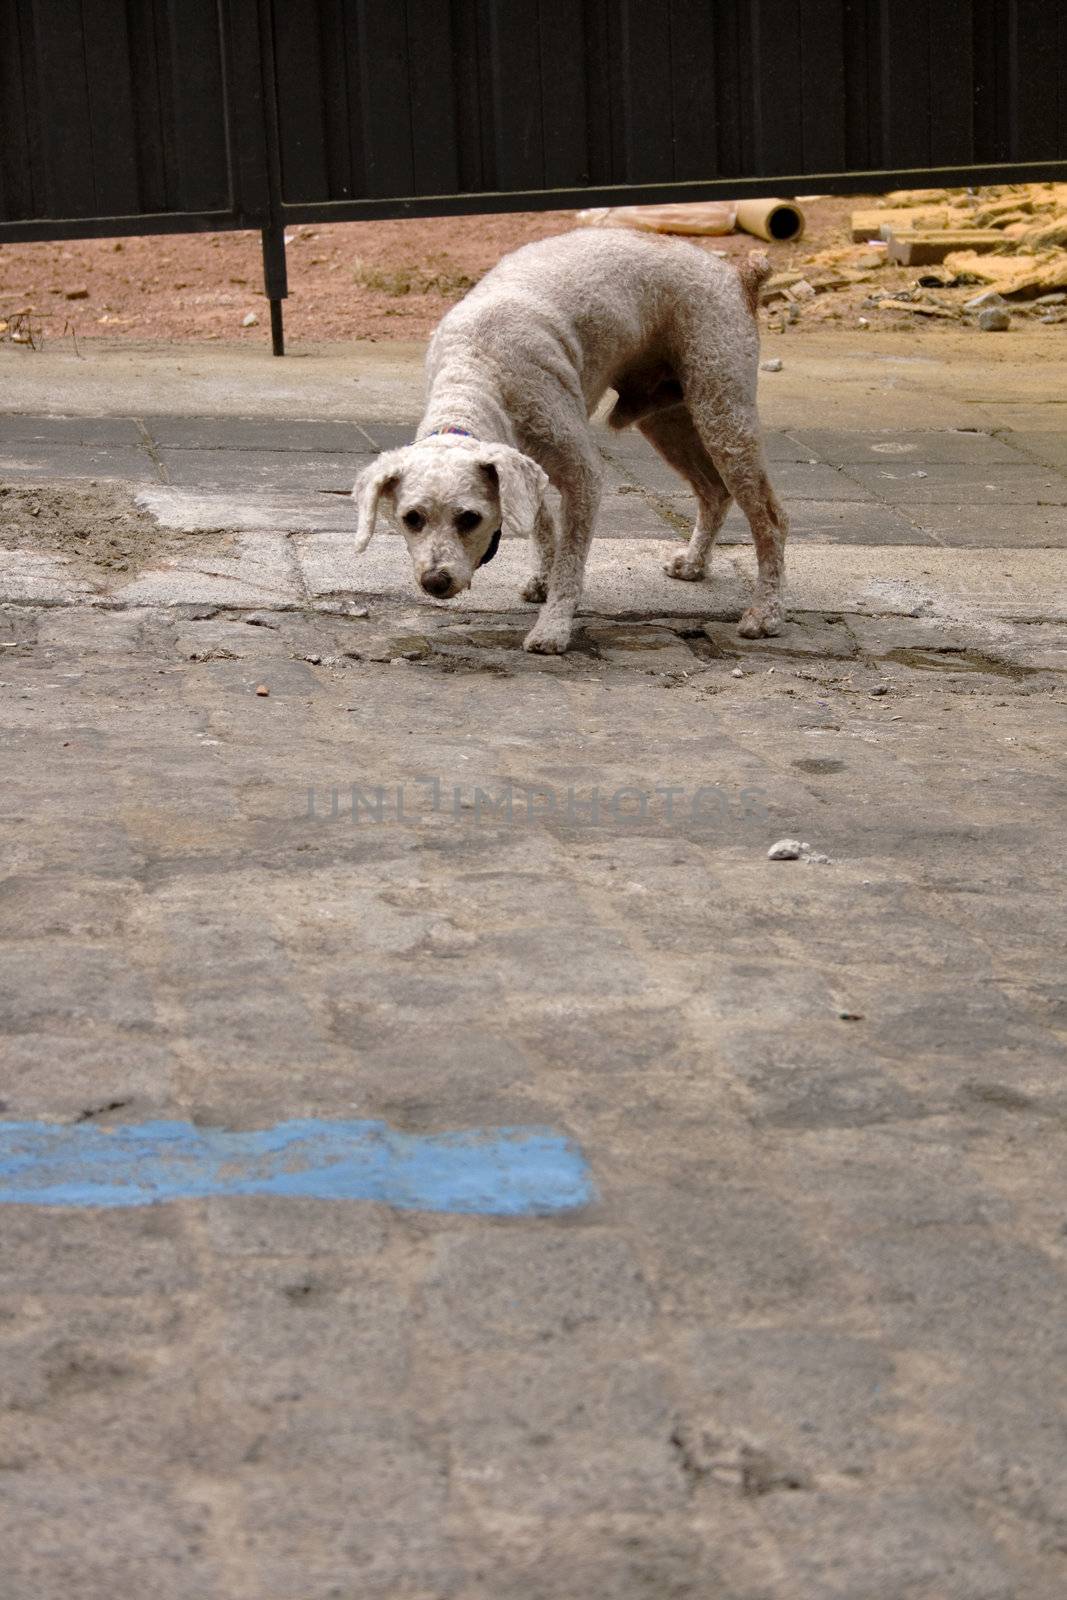 Photo of a Dog in the street